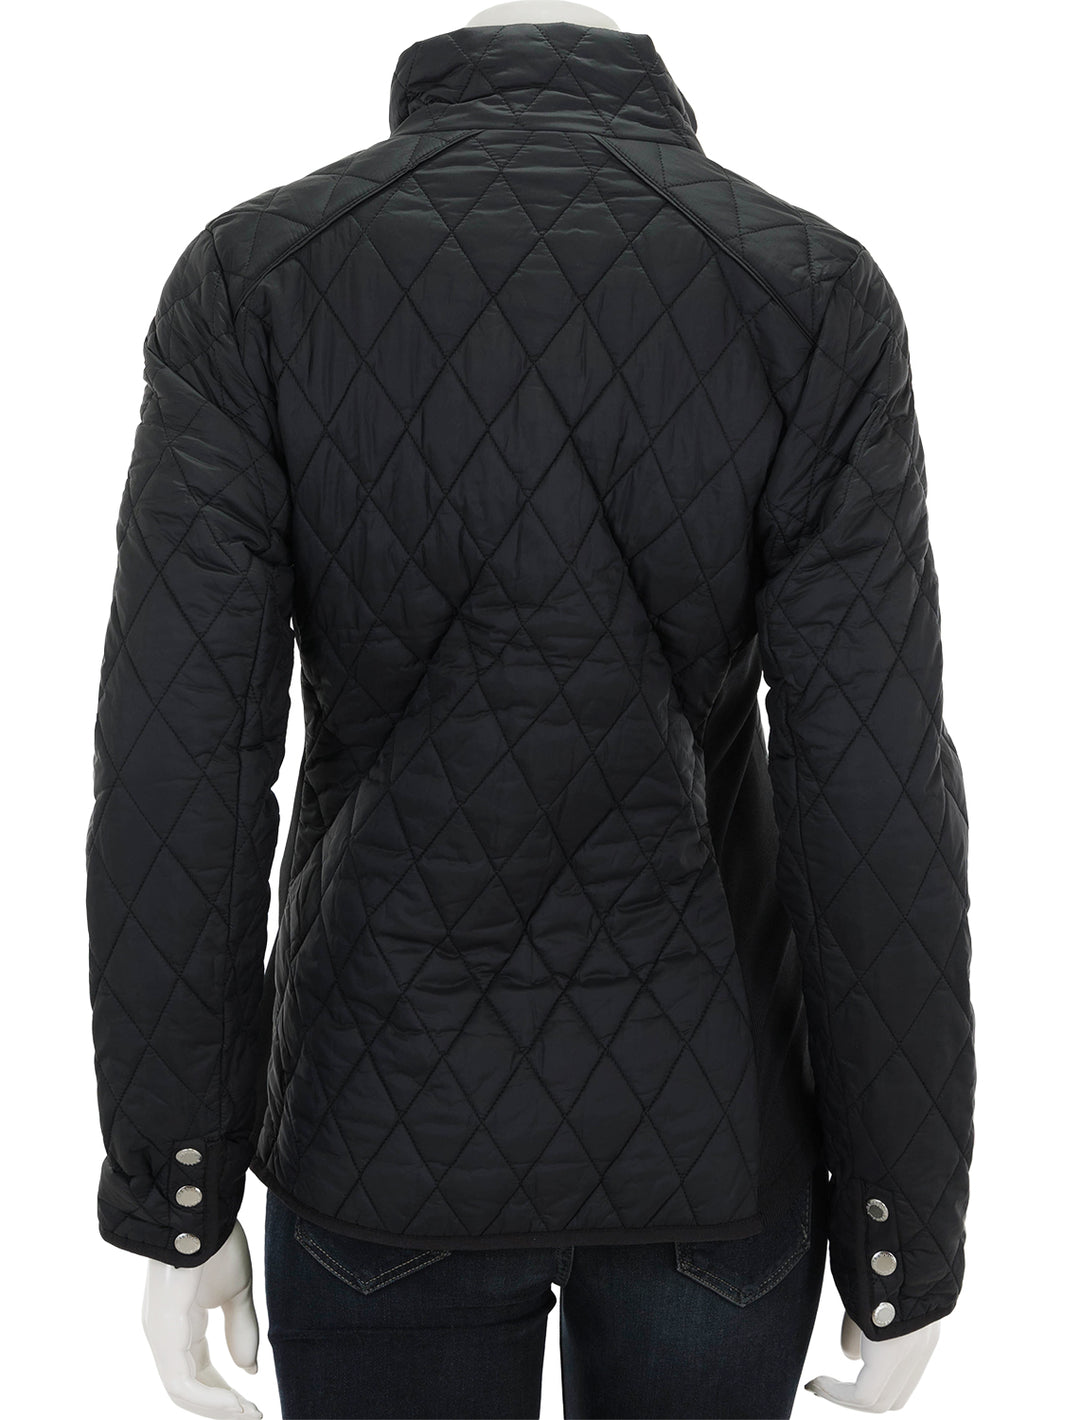 Back view of Barbour's Yarrow Quilted Jacket in Black.